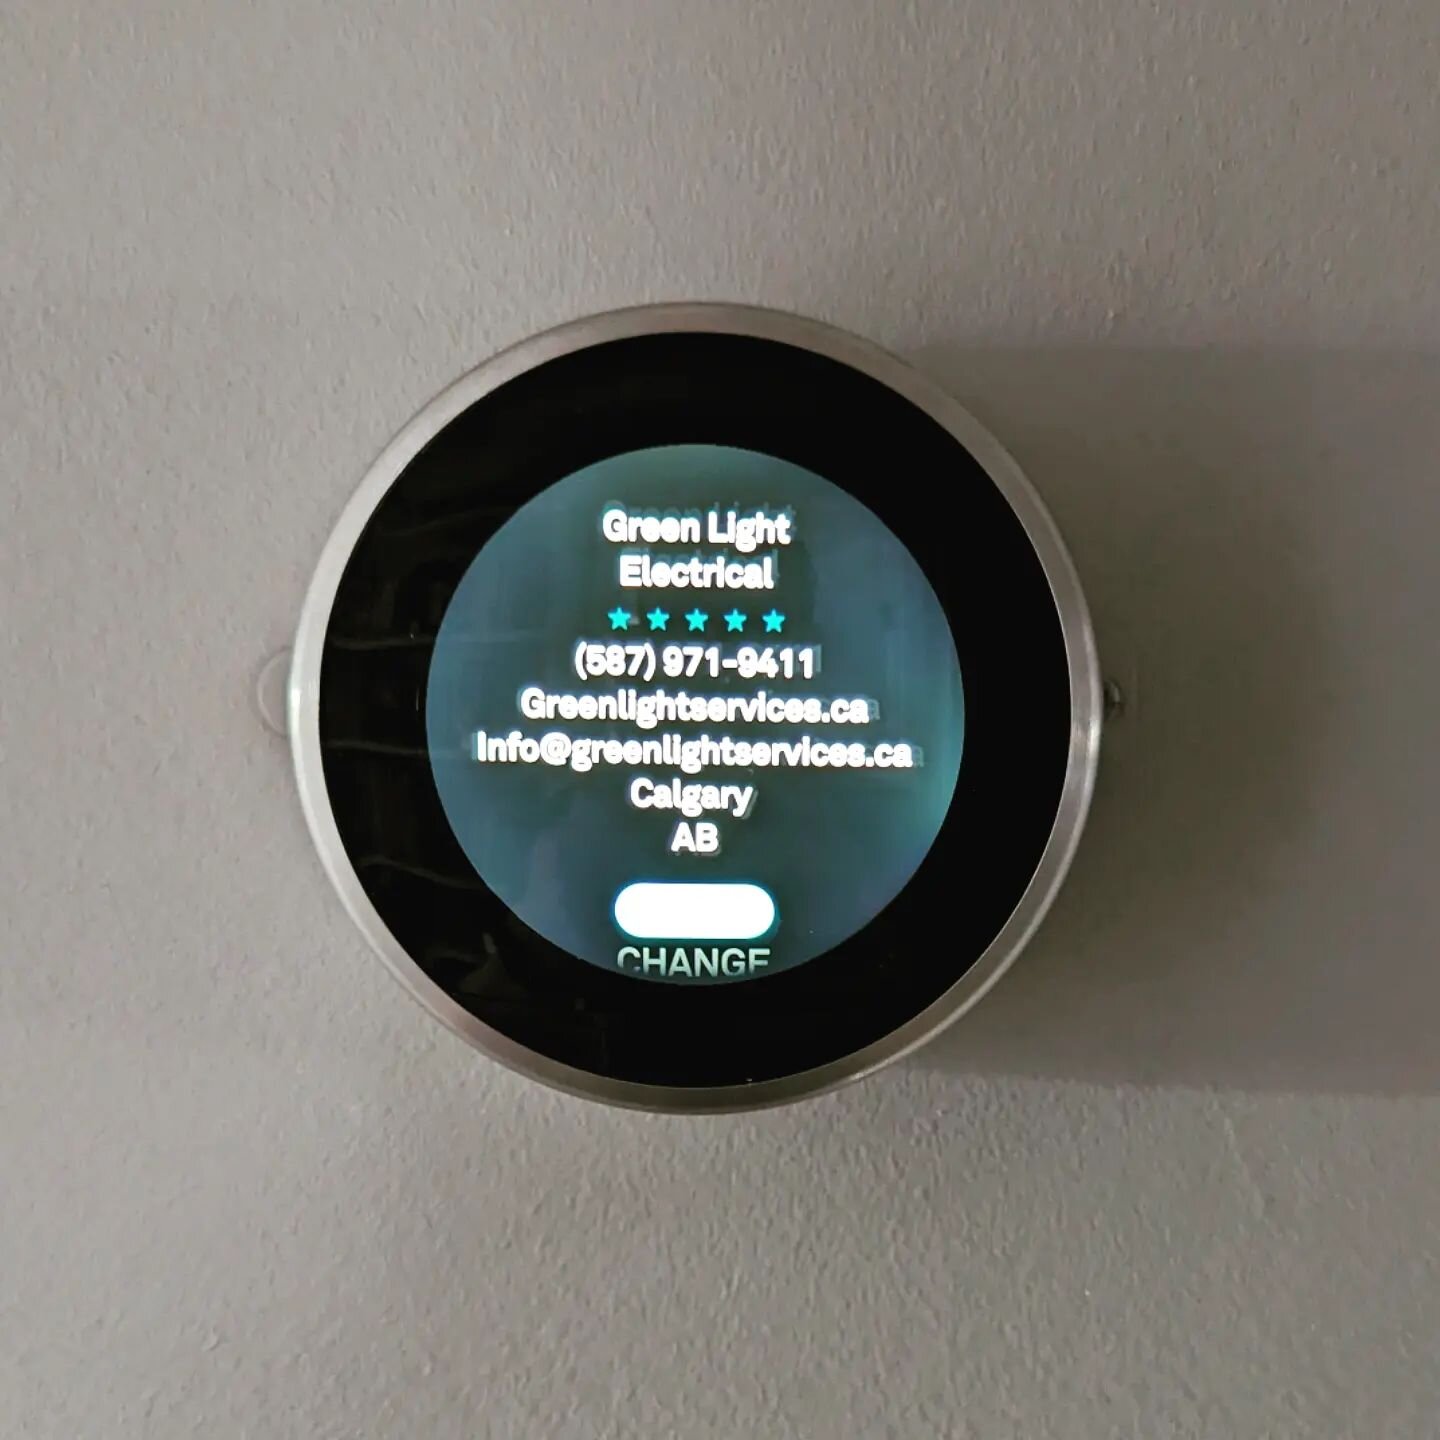 Google Nest Smart Thermostat @greenlight.ca

Can't wait to see what happens Nest! 

* Complete rewire 
* Common Wire 
* Switch to googlenest

Greenlight Electrical Services ltd.
Your local GoogleNest pro if youre having trouble we will put the light 